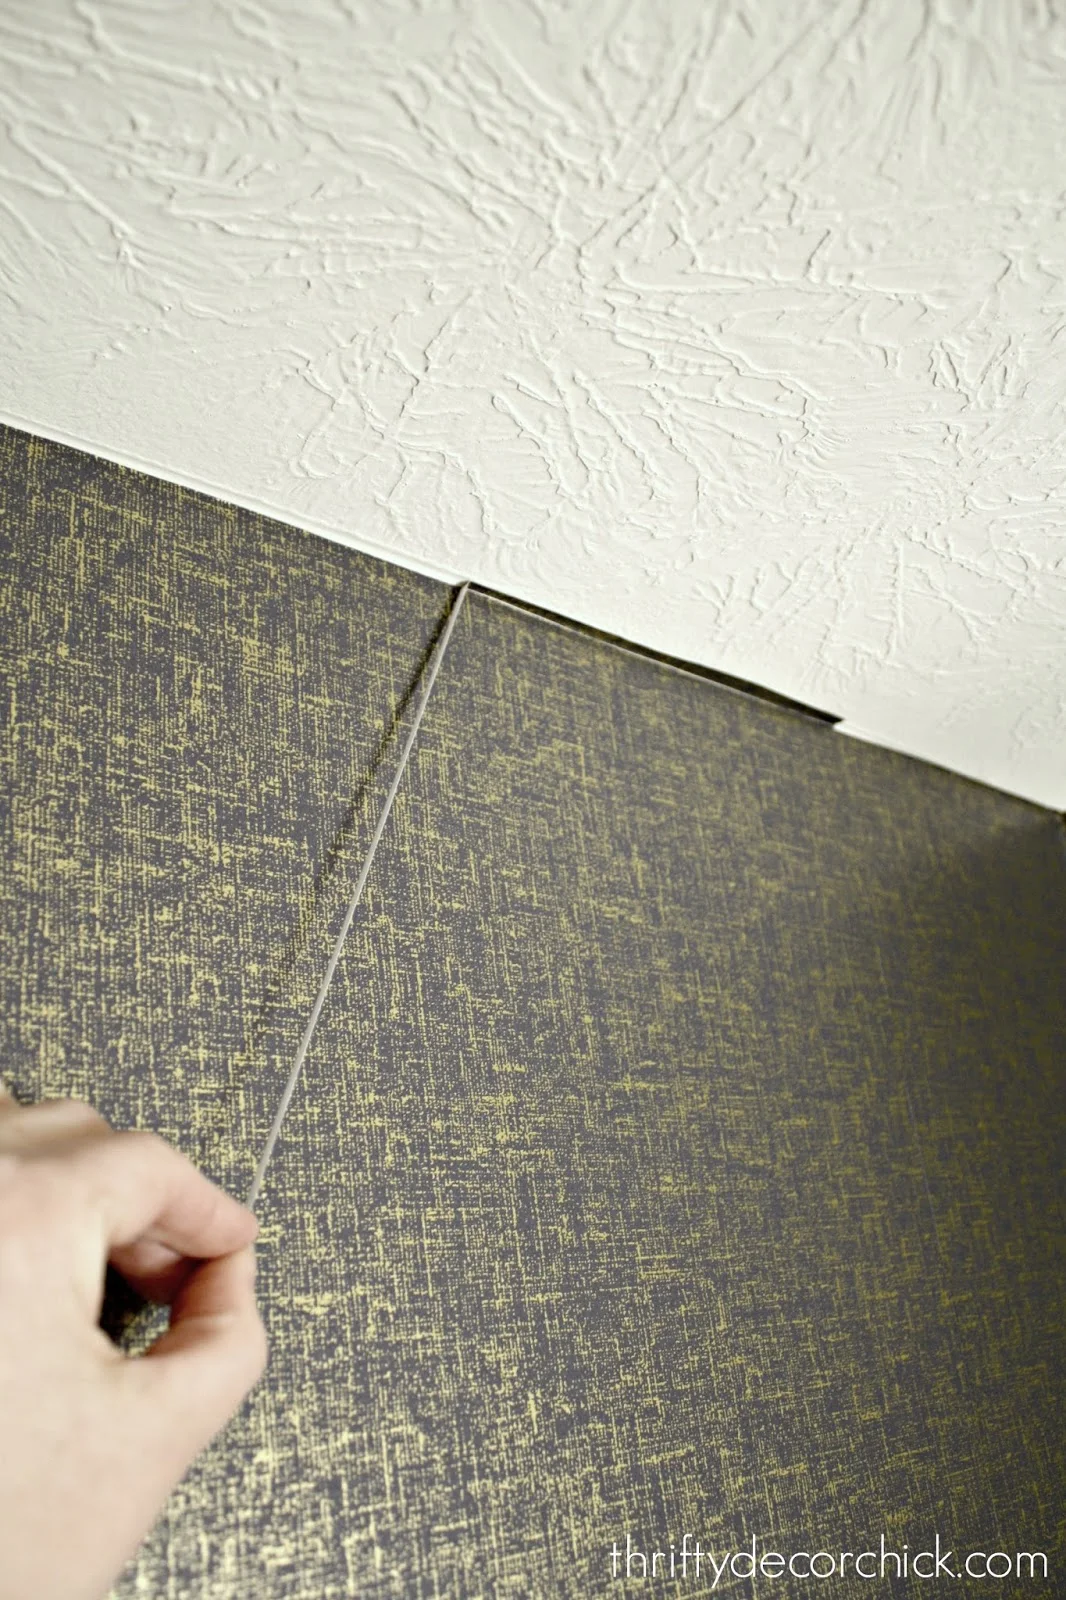 How to clean up edge on wallpaper